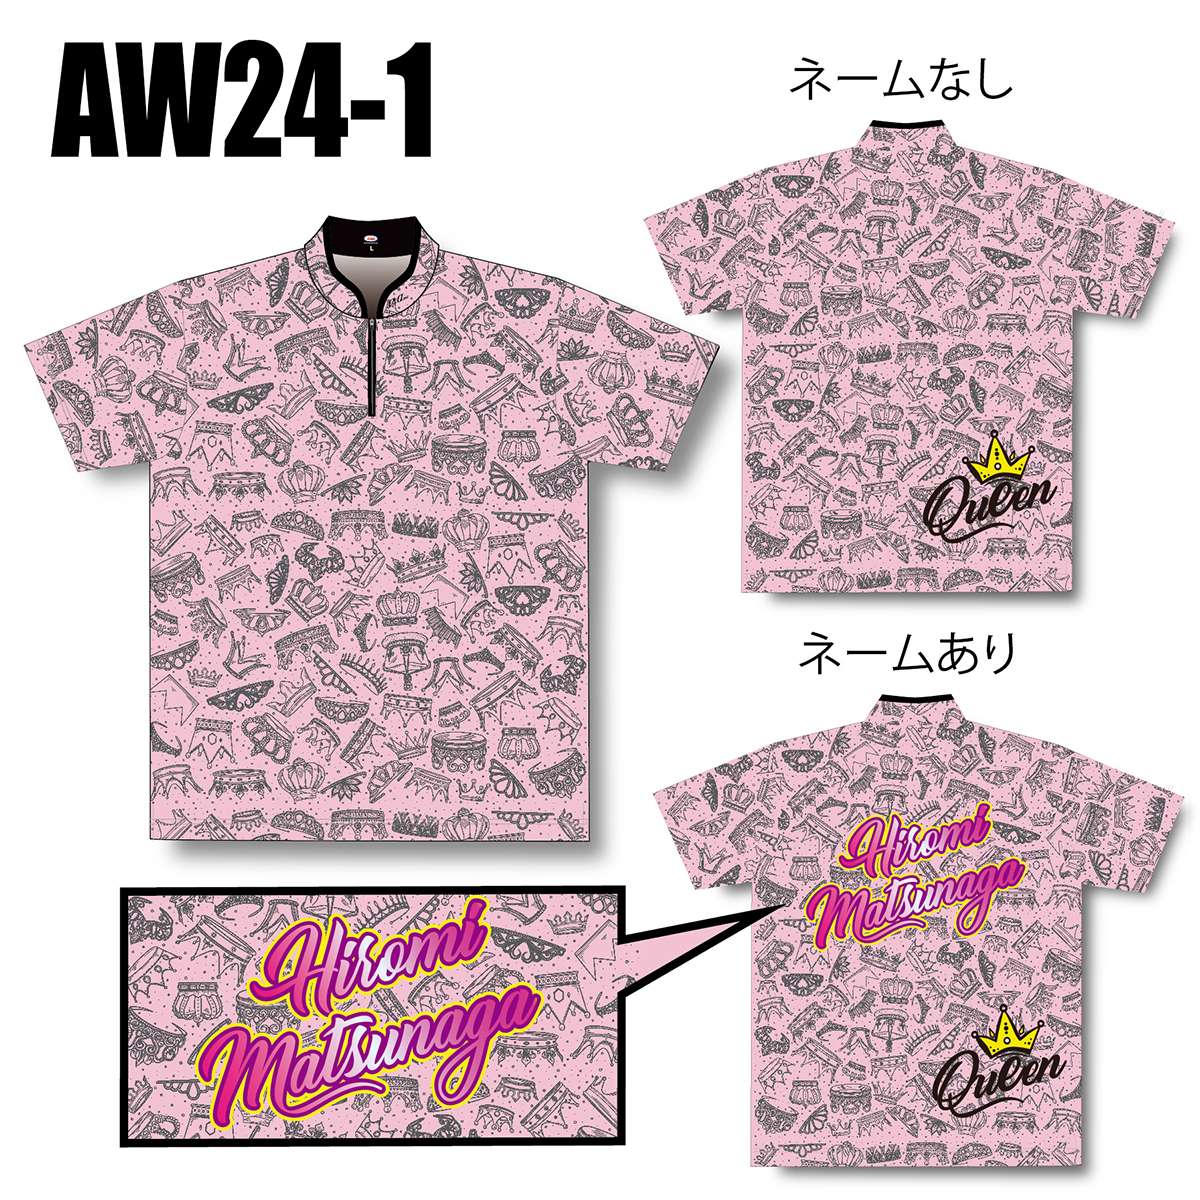 TEAM QUEENモデル(AW24-1・PINK)